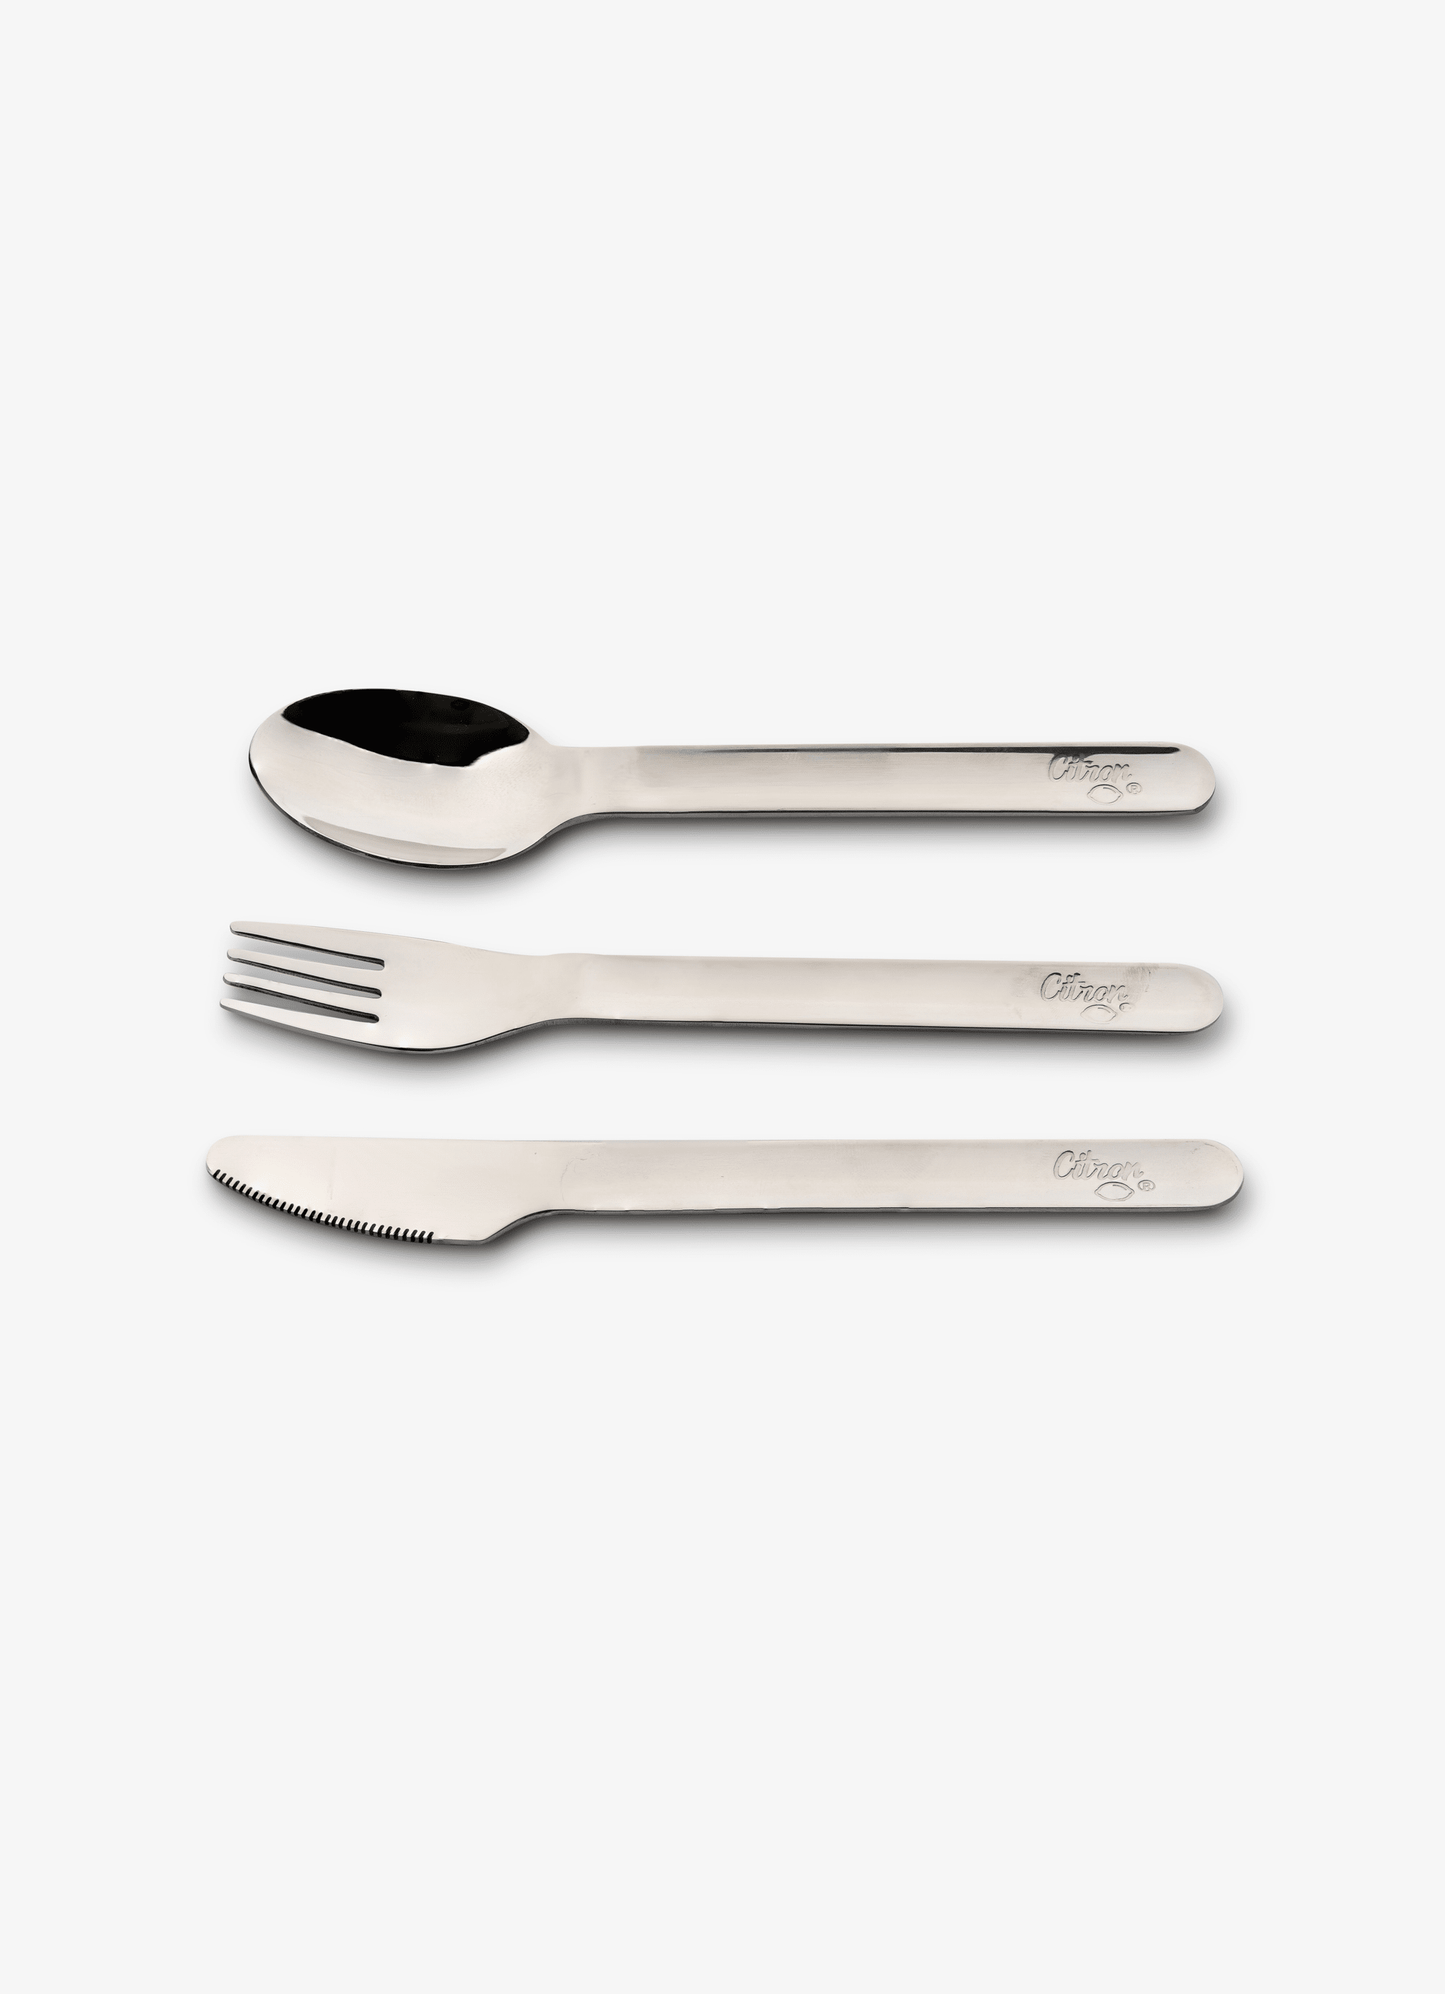 Stainless Steel Cutlery Set - Cherry + Case